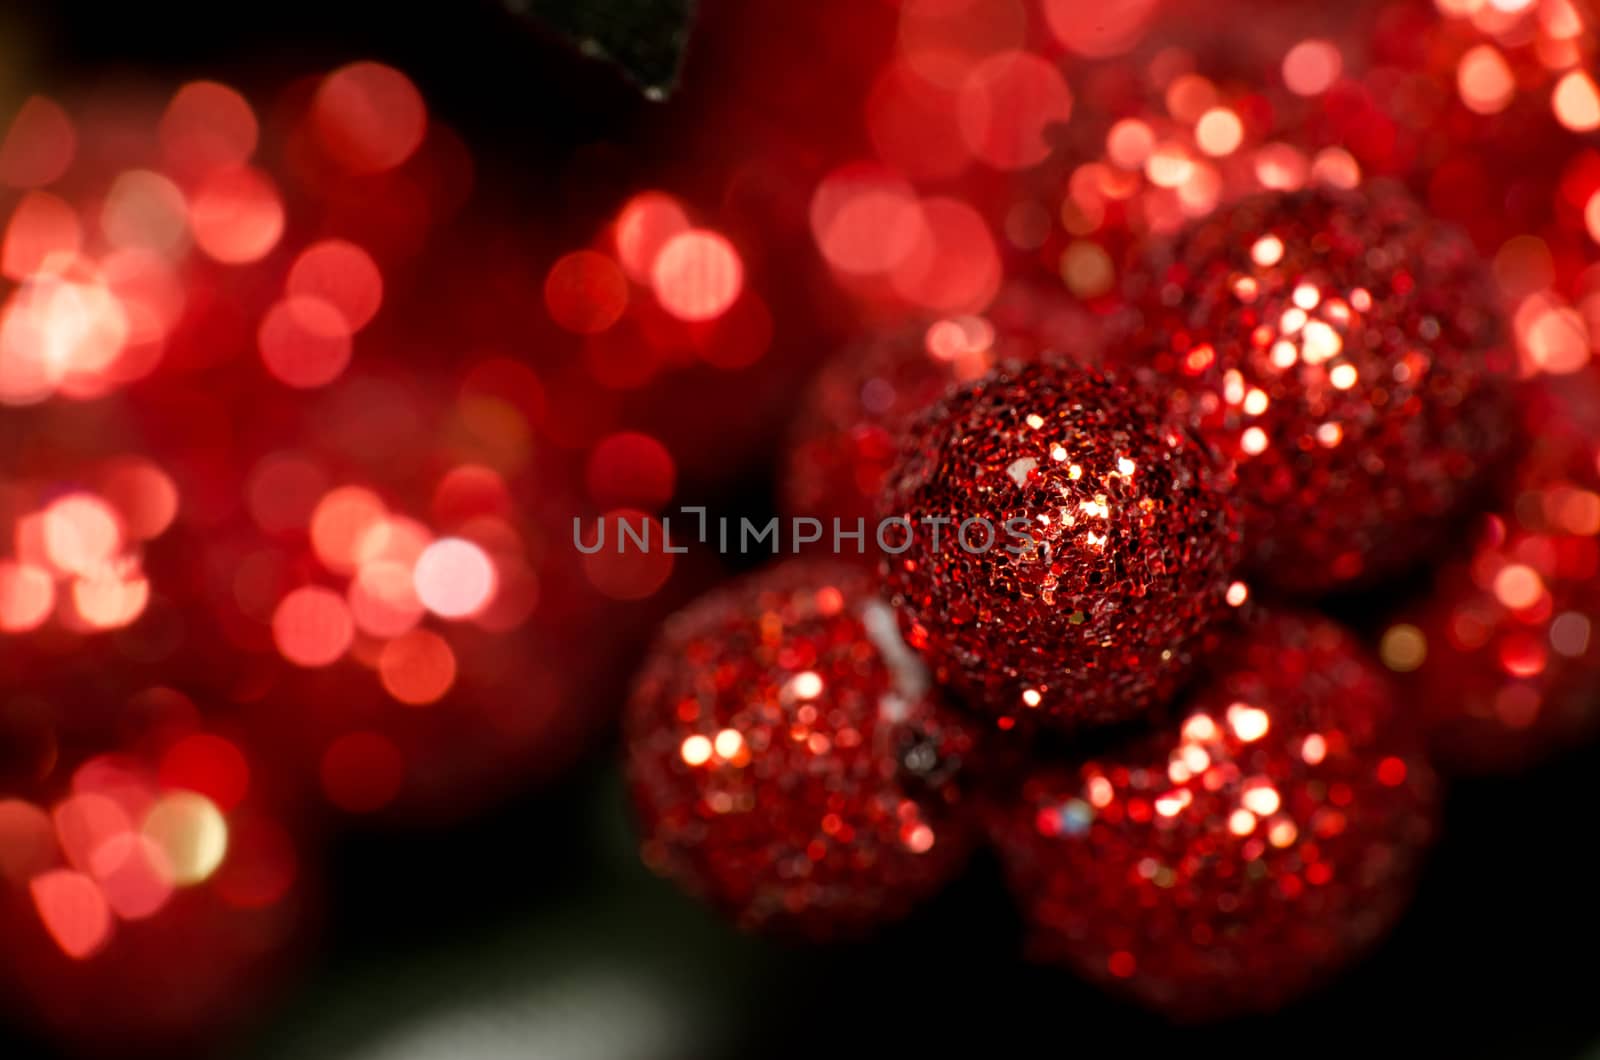 Christmas red shining baubles against red defocused background